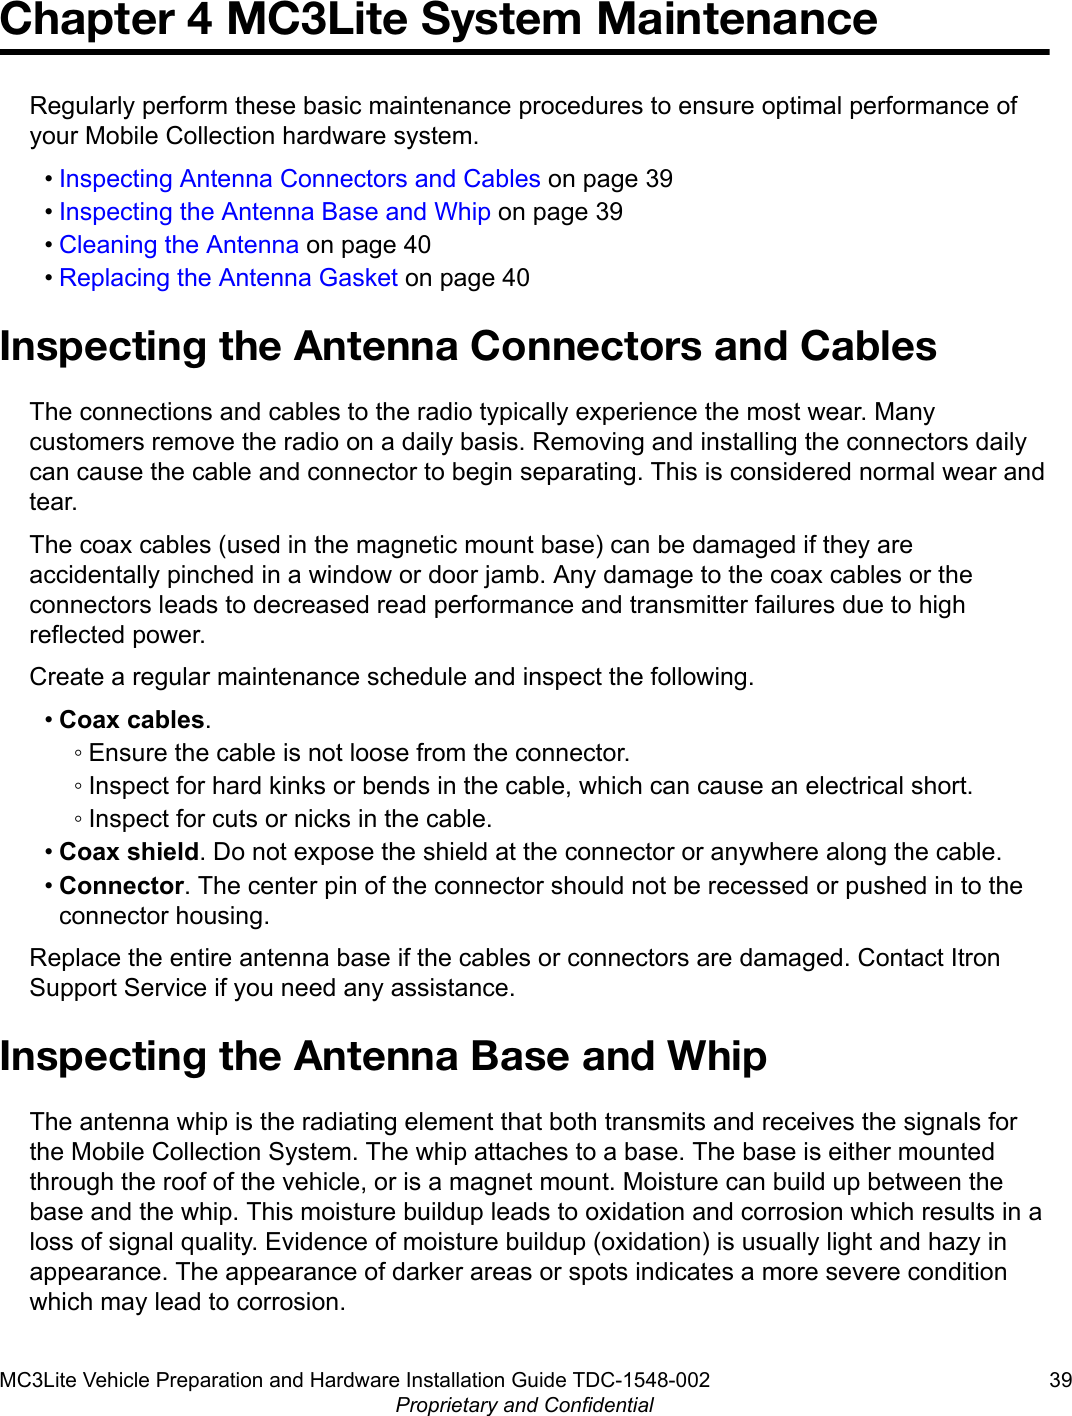 Chapter 4 MC3Lite System MaintenanceRegularly perform these basic maintenance procedures to ensure optimal performance ofyour Mobile Collection hardware system.•Inspecting Antenna Connectors and Cables on page 39•Inspecting the Antenna Base and Whip on page 39•Cleaning the Antenna on page 40•Replacing the Antenna Gasket on page 40Inspecting the Antenna Connectors and CablesThe connections and cables to the radio typically experience the most wear. Manycustomers remove the radio on a daily basis. Removing and installing the connectors dailycan cause the cable and connector to begin separating. This is considered normal wear andtear.The coax cables (used in the magnetic mount base) can be damaged if they areaccidentally pinched in a window or door jamb. Any damage to the coax cables or theconnectors leads to decreased read performance and transmitter failures due to highreflected power.Create a regular maintenance schedule and inspect the following.•Coax cables.◦ Ensure the cable is not loose from the connector.◦ Inspect for hard kinks or bends in the cable, which can cause an electrical short.◦ Inspect for cuts or nicks in the cable.•Coax shield. Do not expose the shield at the connector or anywhere along the cable.•Connector. The center pin of the connector should not be recessed or pushed in to theconnector housing.Replace the entire antenna base if the cables or connectors are damaged. Contact ItronSupport Service if you need any assistance.Inspecting the Antenna Base and WhipThe antenna whip is the radiating element that both transmits and receives the signals forthe Mobile Collection System. The whip attaches to a base. The base is either mountedthrough the roof of the vehicle, or is a magnet mount. Moisture can build up between thebase and the whip. This moisture buildup leads to oxidation and corrosion which results in aloss of signal quality. Evidence of moisture buildup (oxidation) is usually light and hazy inappearance. The appearance of darker areas or spots indicates a more severe conditionwhich may lead to corrosion.MC3Lite Vehicle Preparation and Hardware Installation Guide TDC-1548-002 39Proprietary and Confidential